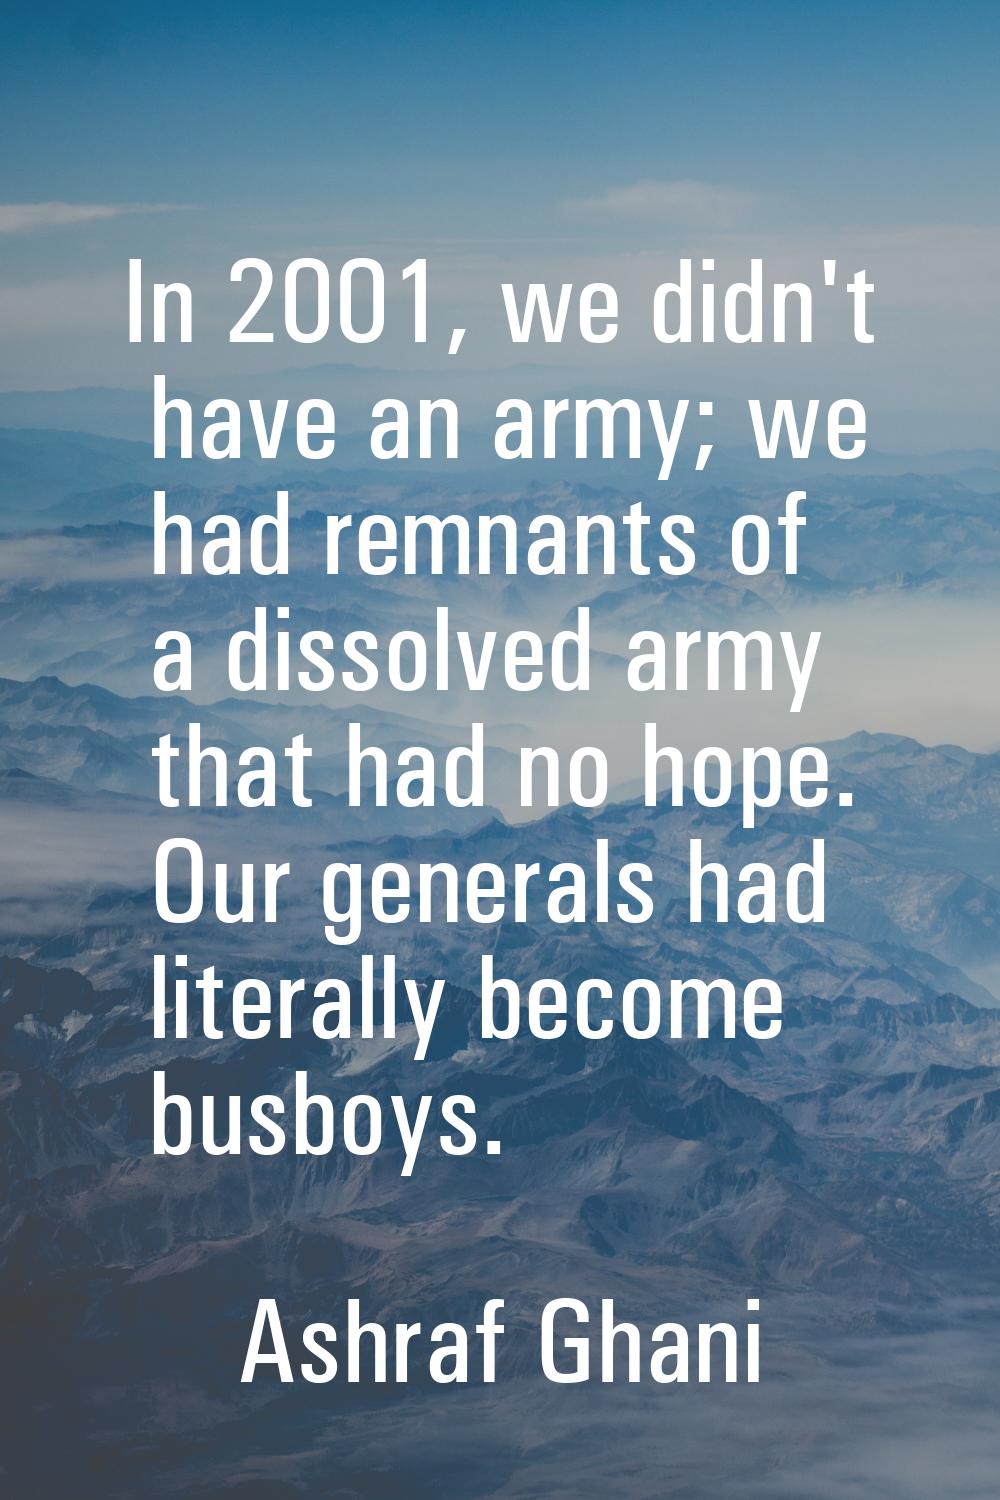 In 2001, we didn't have an army; we had remnants of a dissolved army that had no hope. Our generals